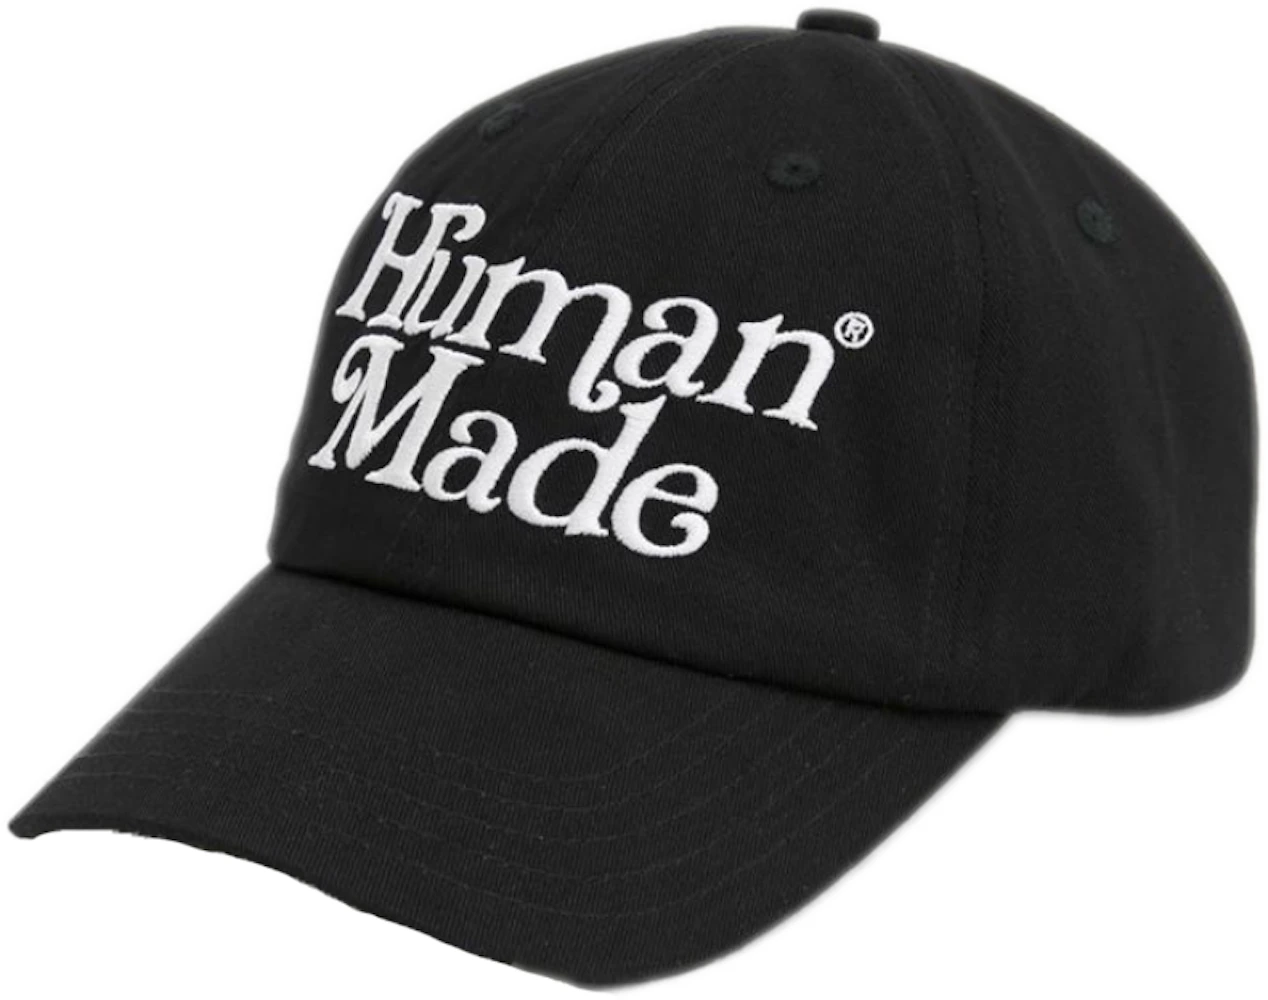 Human Made x Girls Don't Cry Hat Black